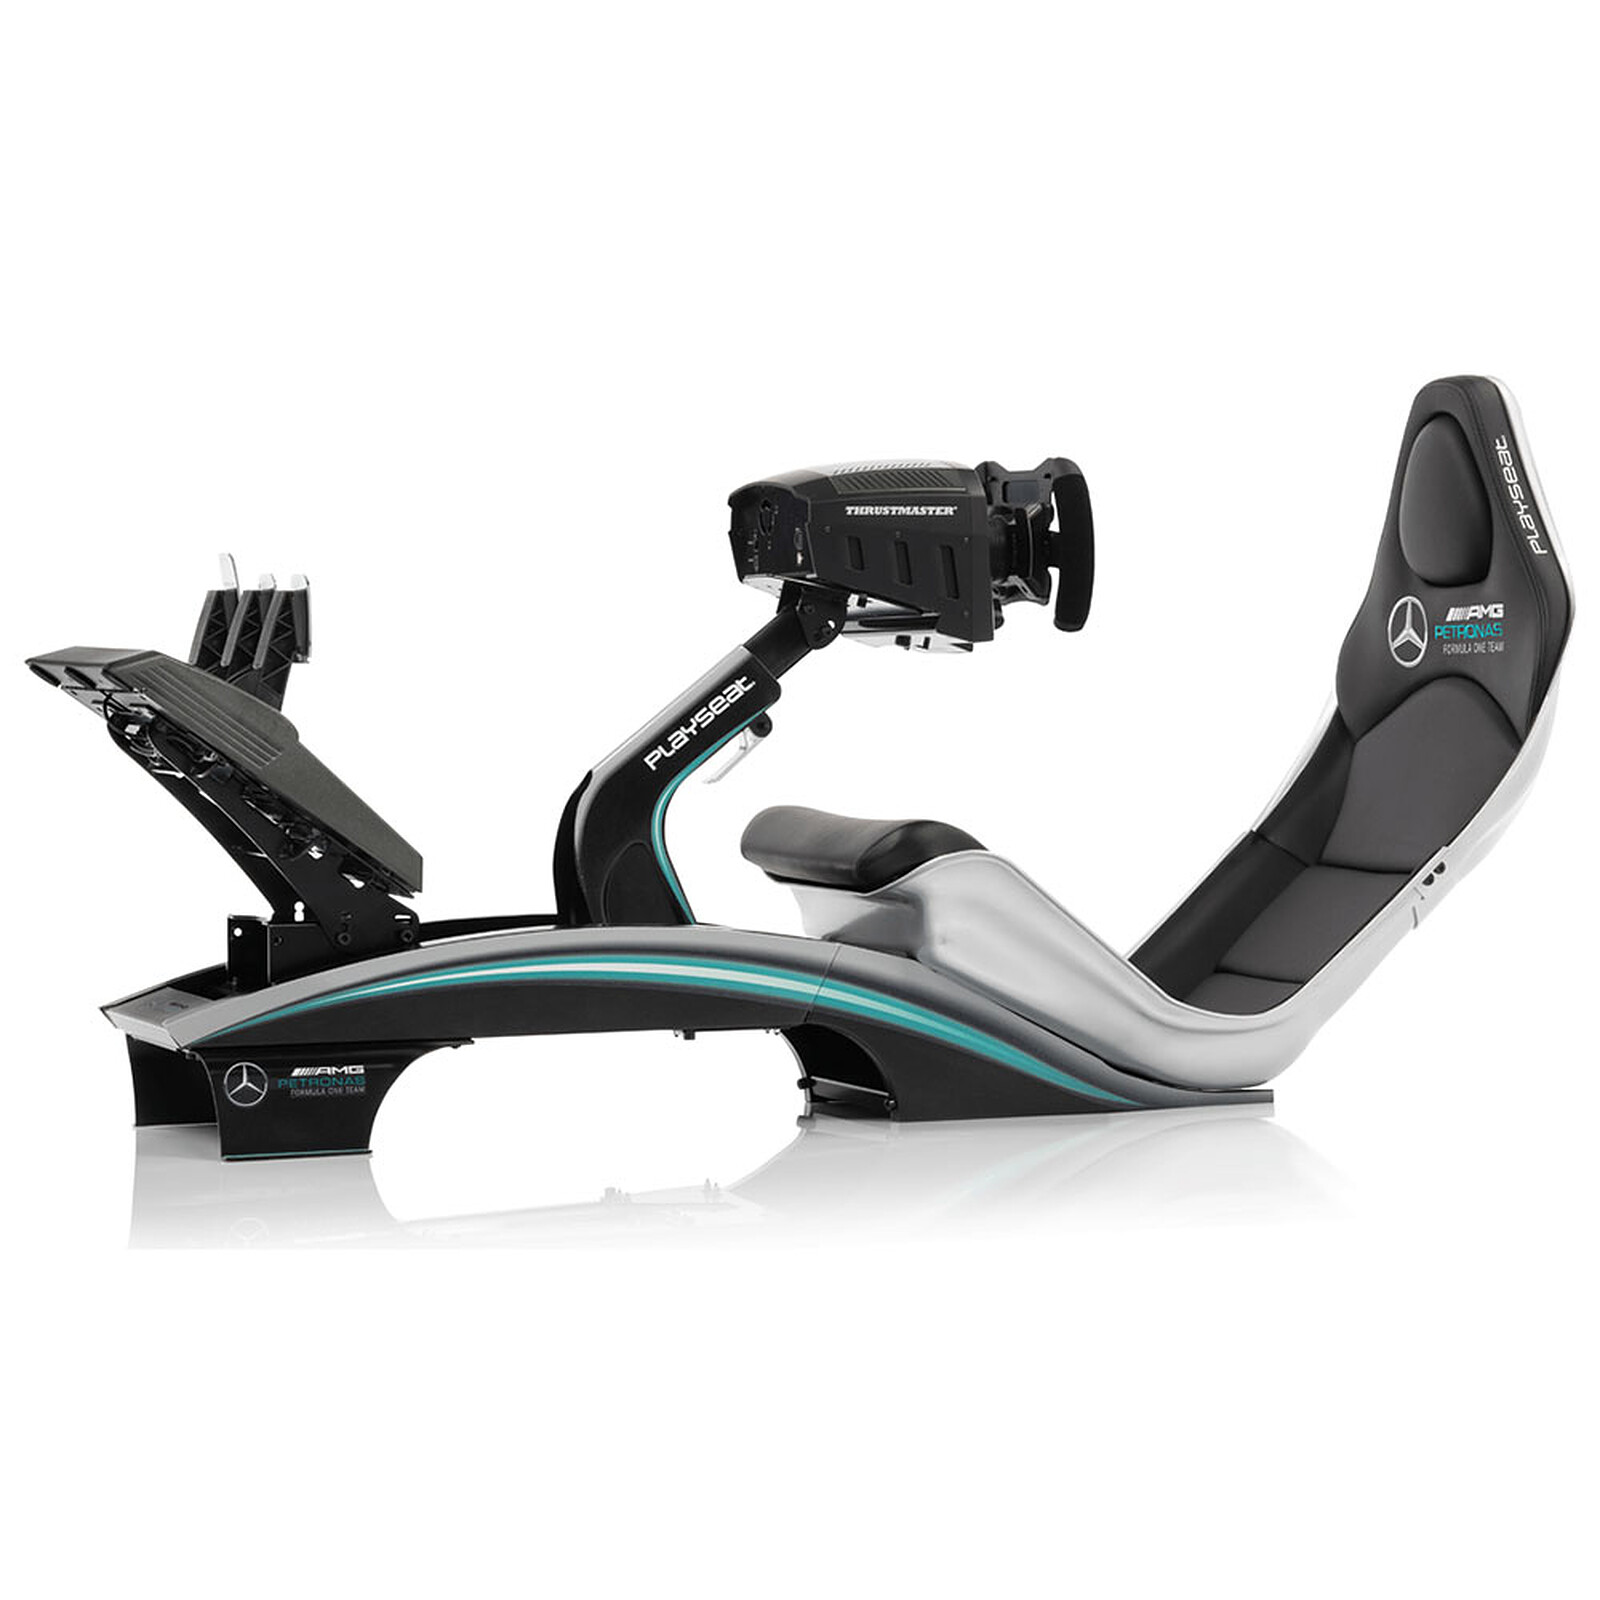  Playseat Formula Sim Racing Cockpit, High Performance Racing  Simulator Cockpit for All Steering Wheels, Pedals and All Consoles, for  Authentic F1 Racing, Fully Adjustable